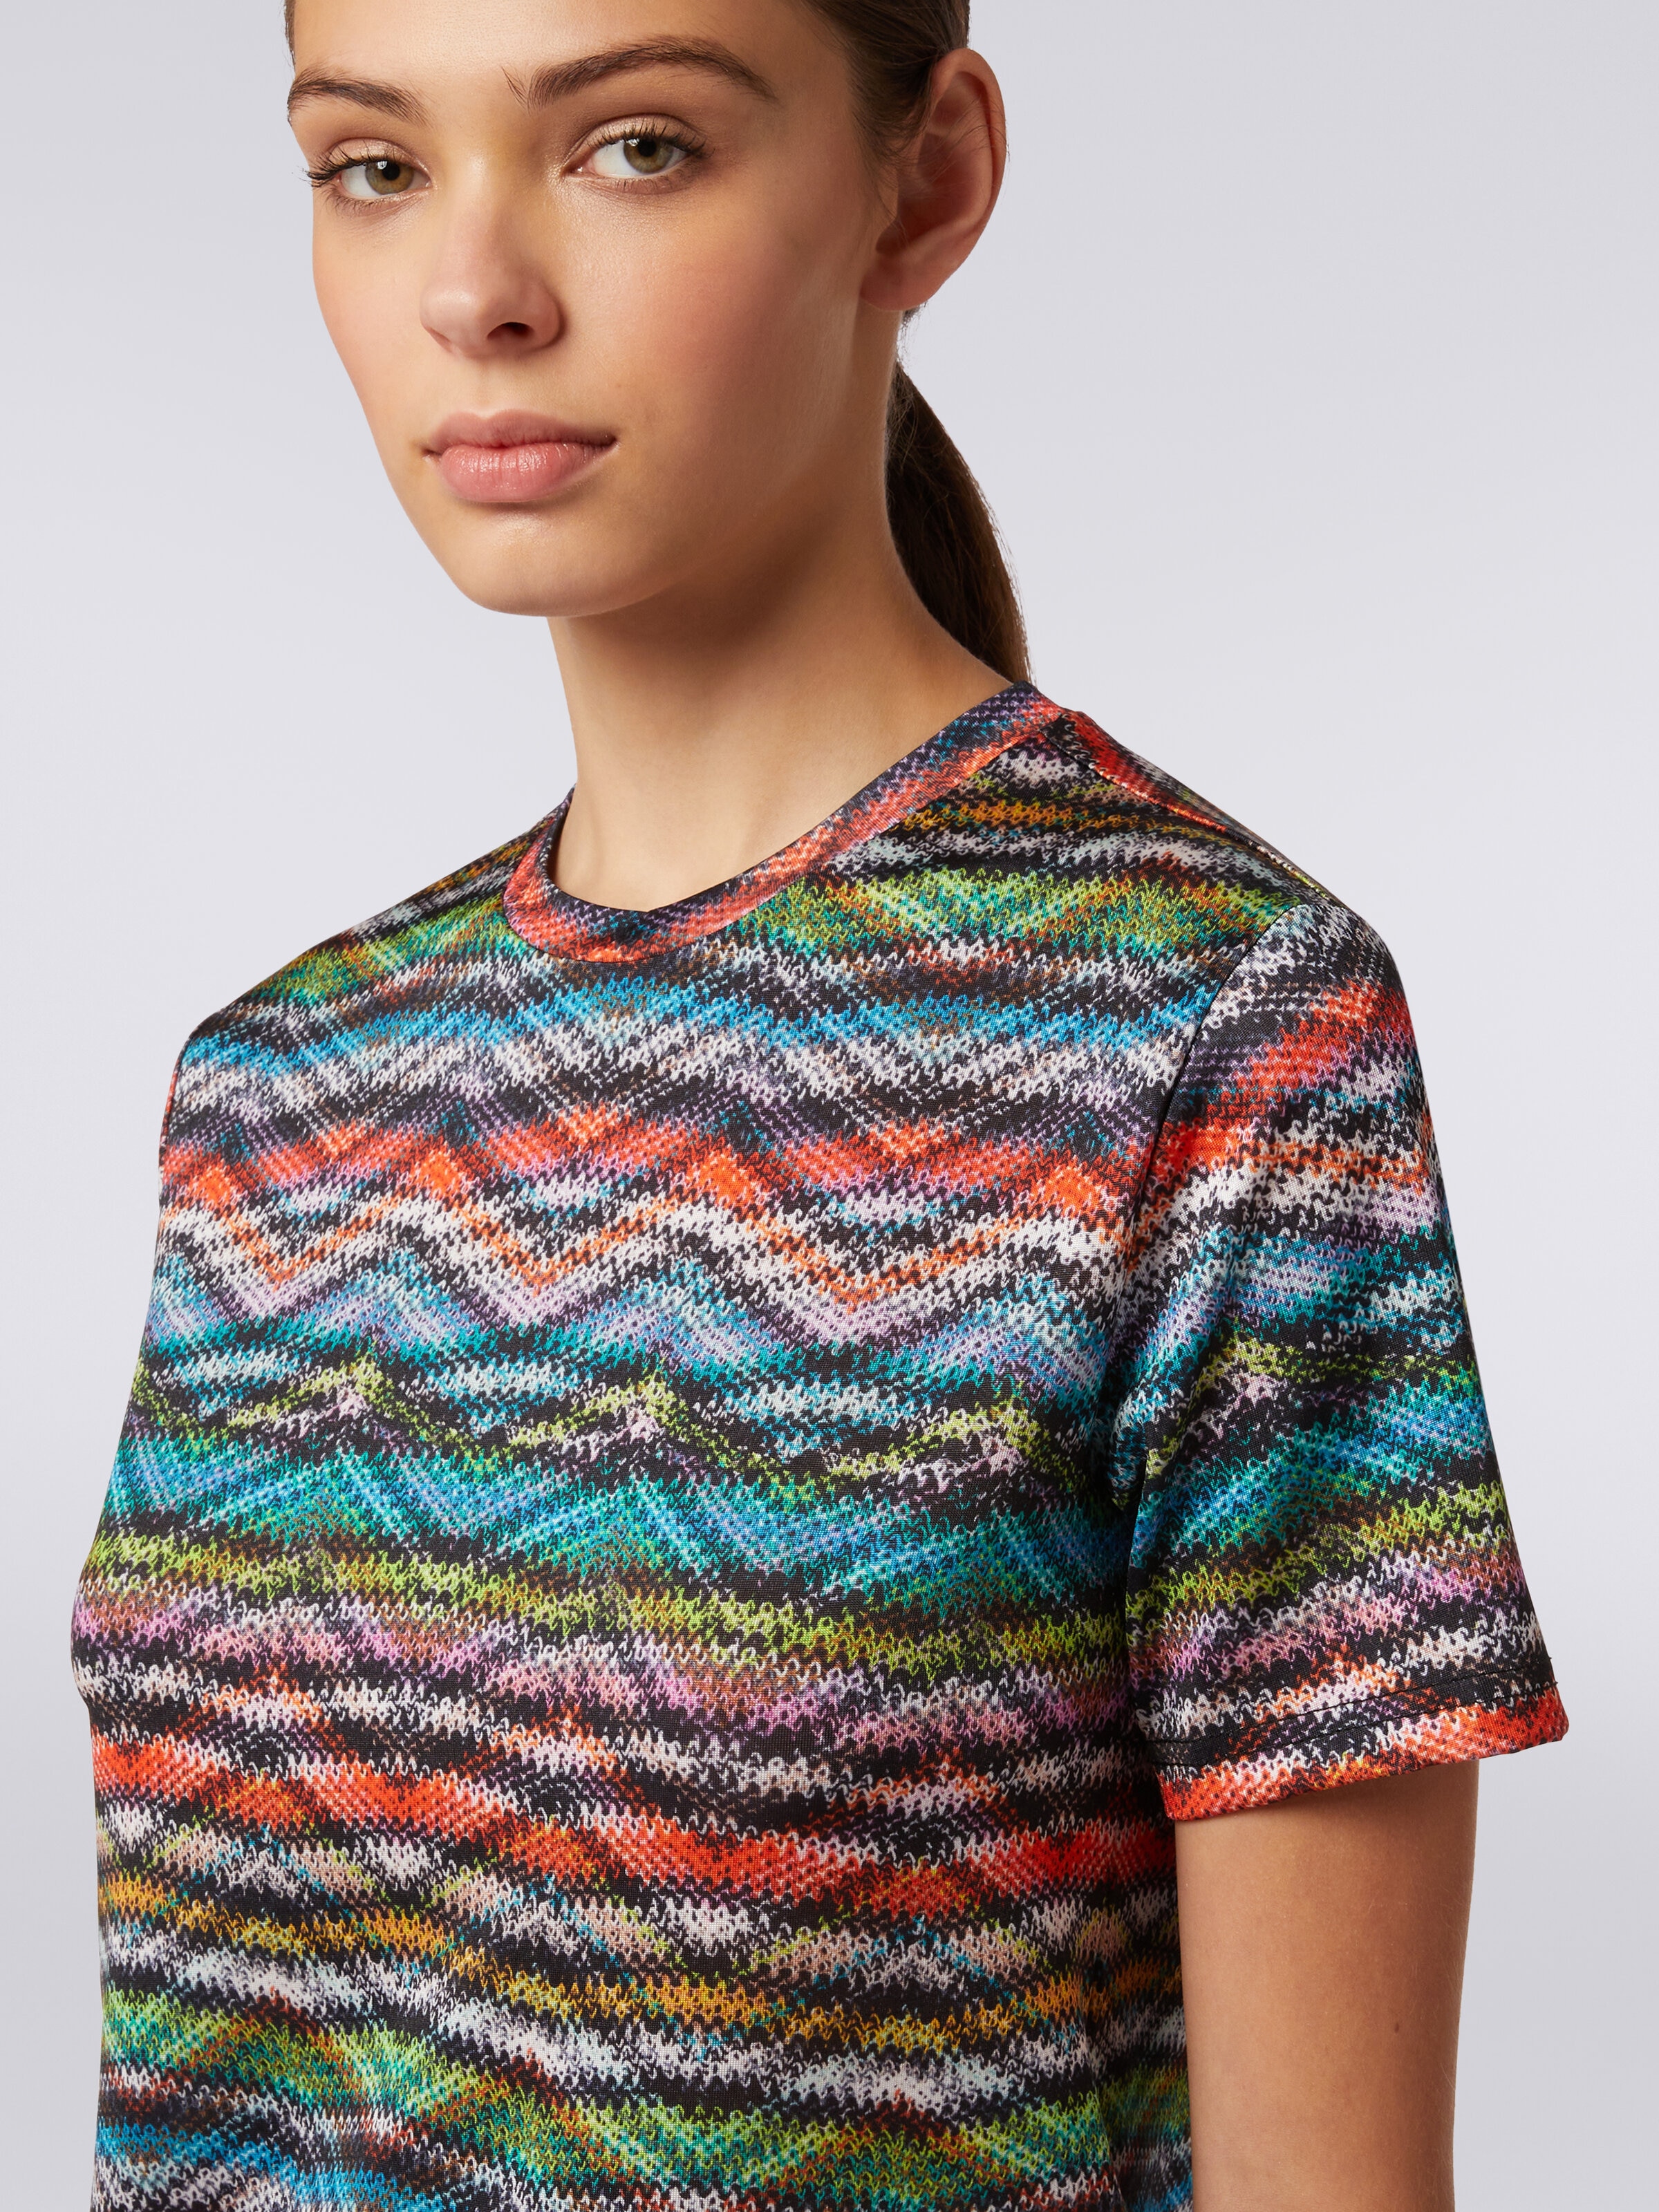 T-shirt in printed stretch nylon, Multicoloured  - 4